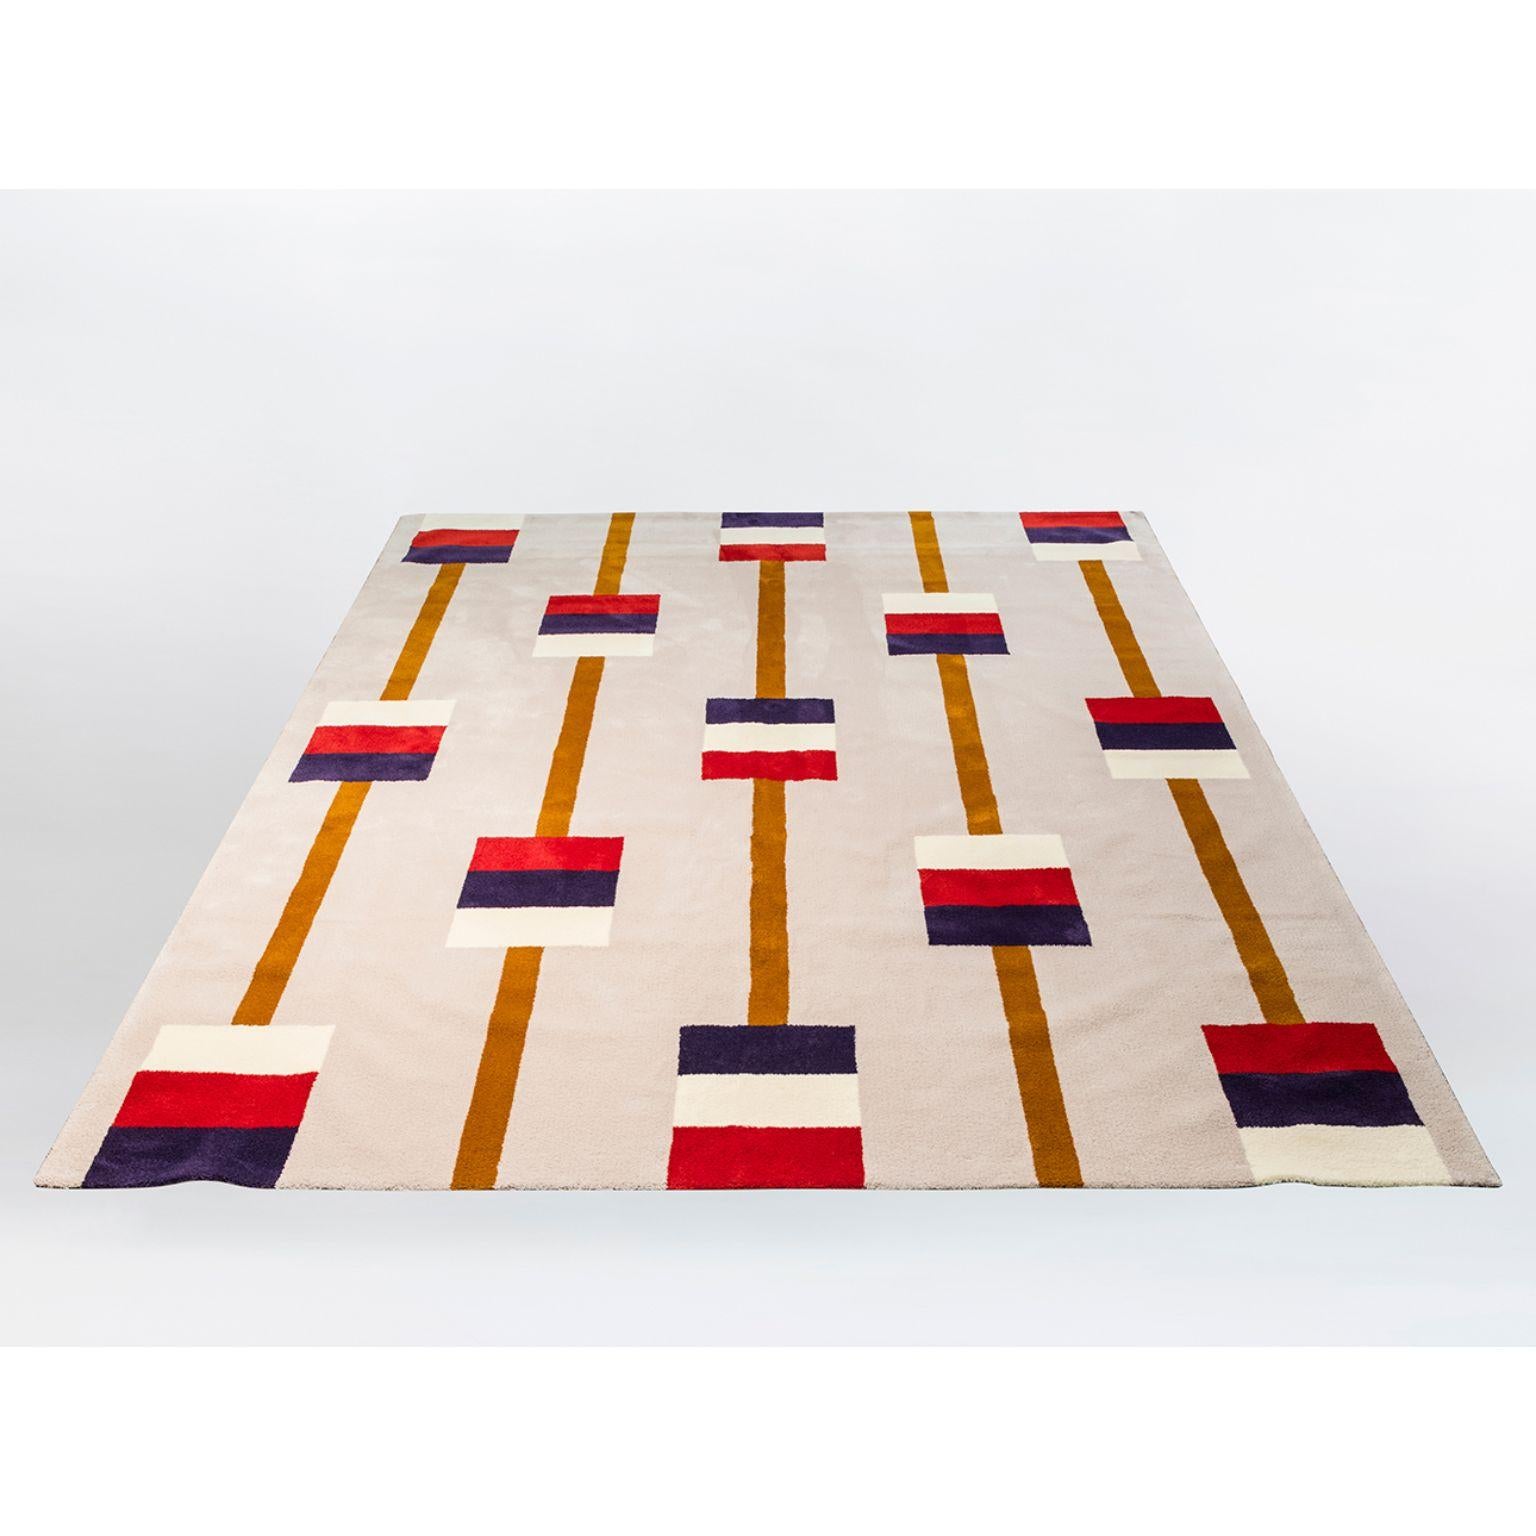 Playtime rug Abacus by Emma Boomkamp.
Materials: W 400 x D 300 cm
Dimensions: wool hand knotted or tufted version

Other dimension available: W 300 x D200 cm.

Emma Boomkamp’s Playtime rug collection is inspired by the childhood. A nod to the